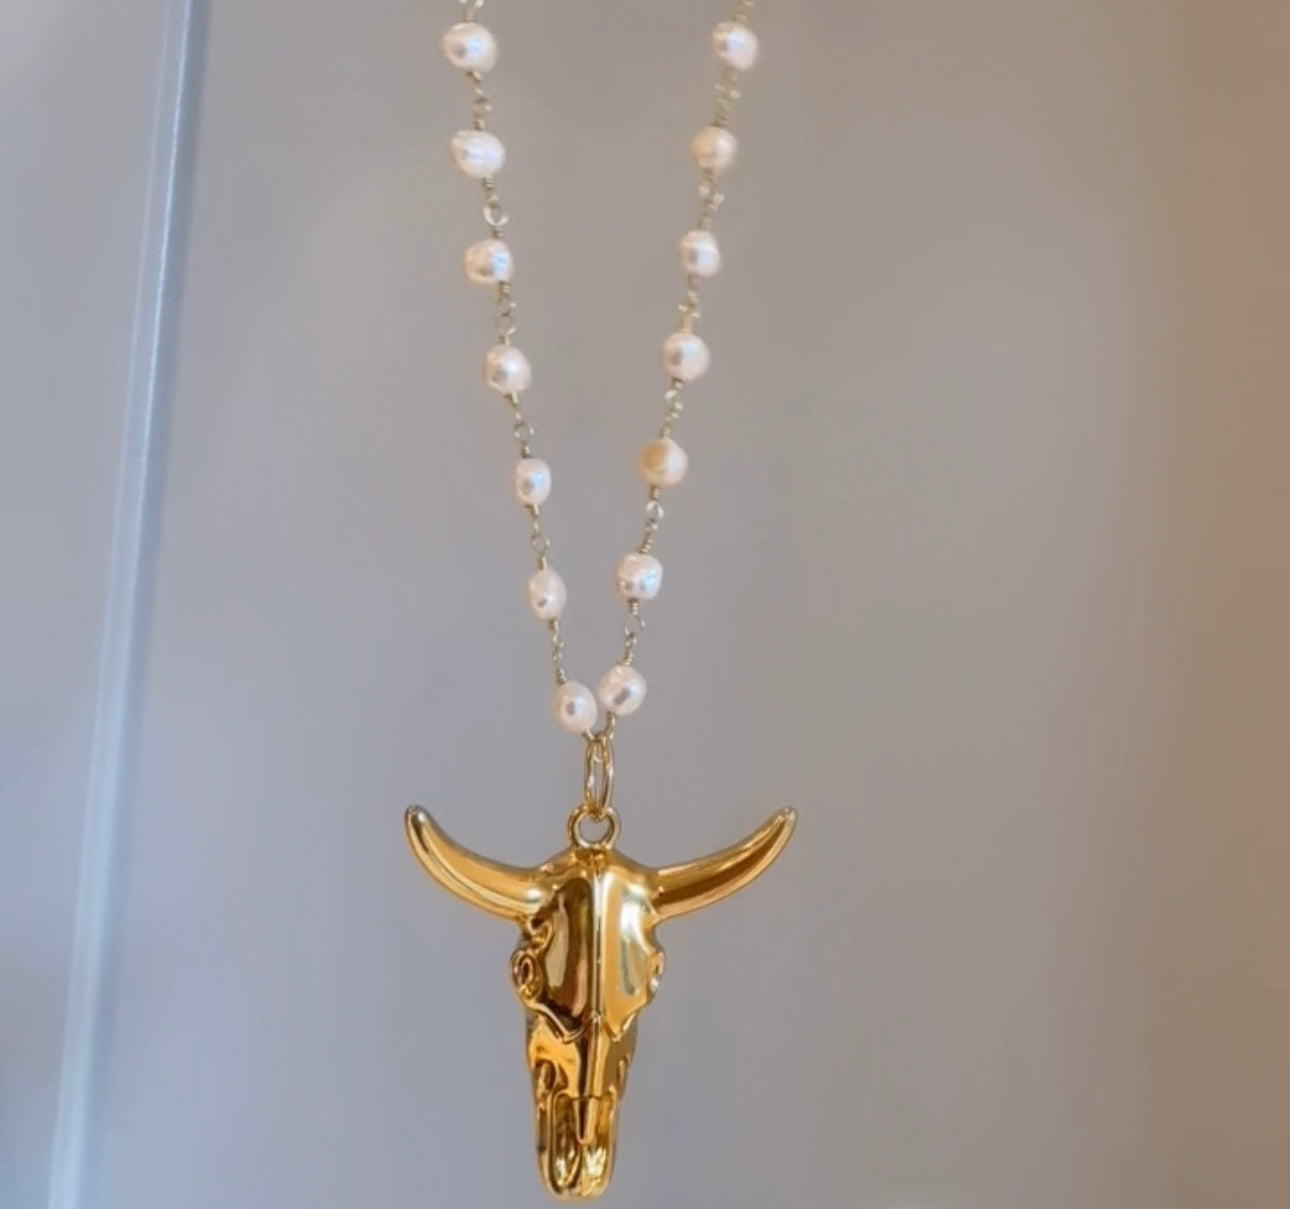 Bull pendant on pearl chain or paperclip chain